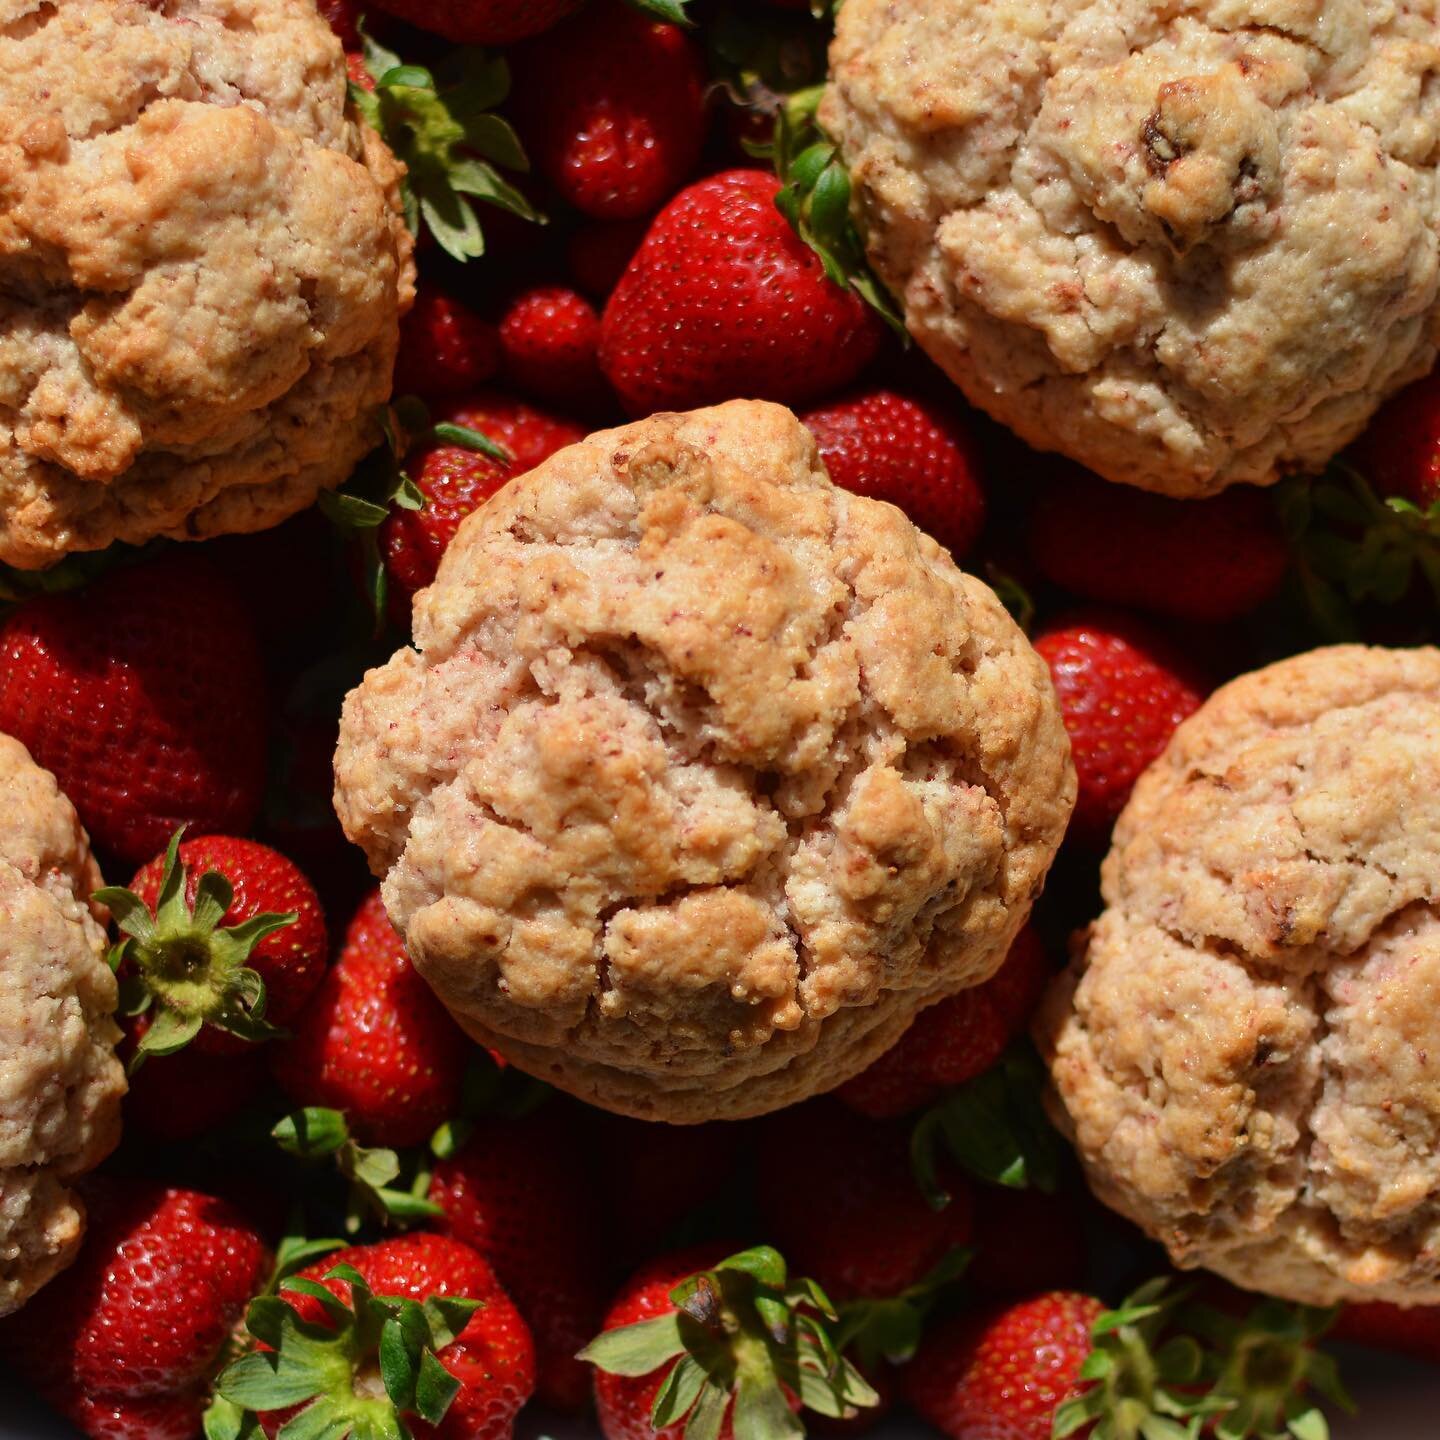 Strawberry scones are now available for shipment! Send this taste of spring to someone special today. Tap the link in our bio to visit our online shop.